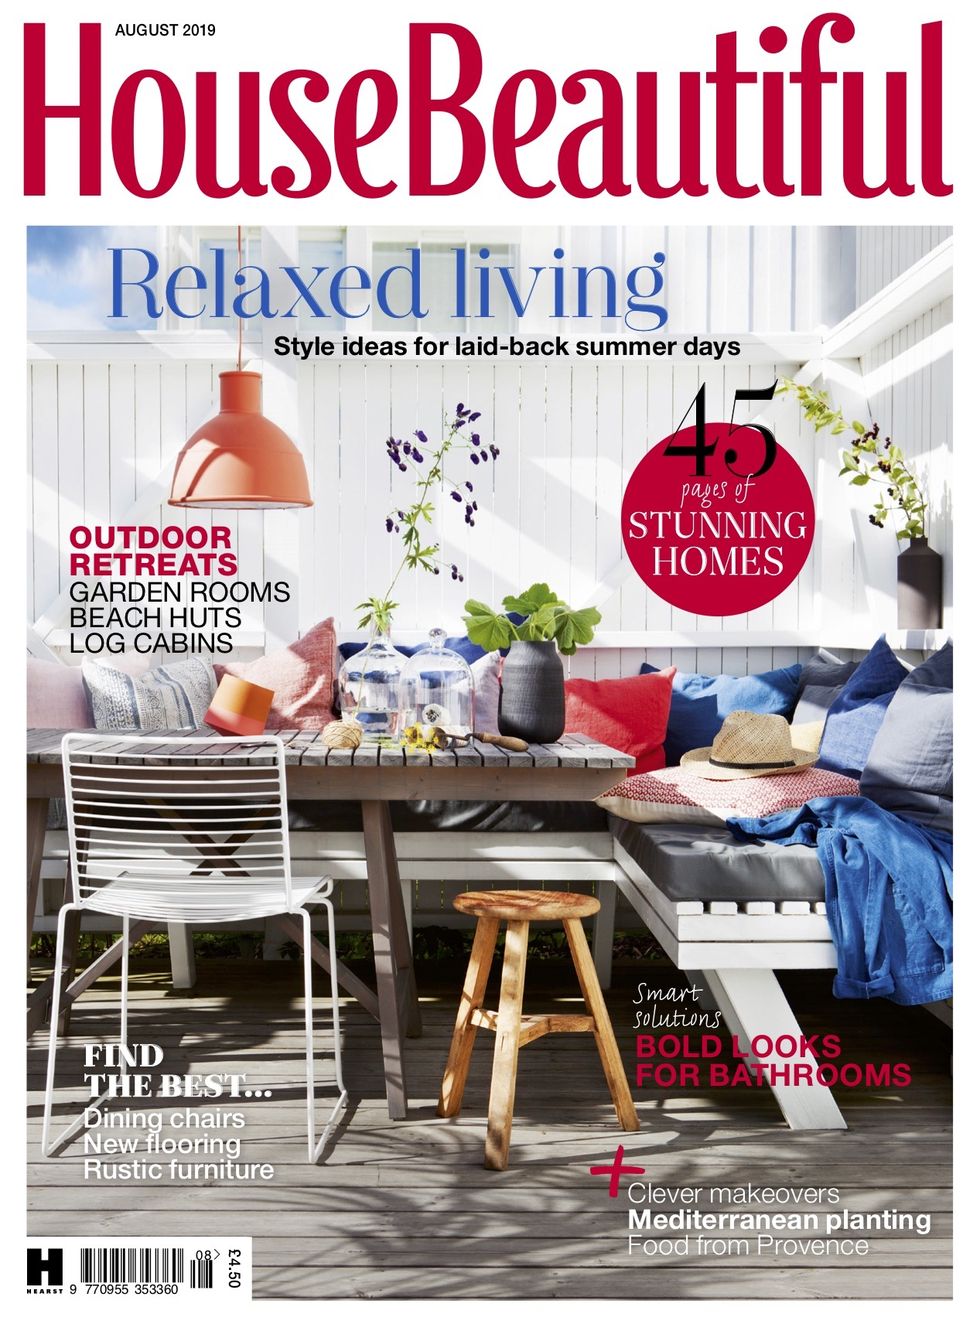 House Beautiful Magazine | Top 10 interior design magazines in the world | Business Connect Magazine